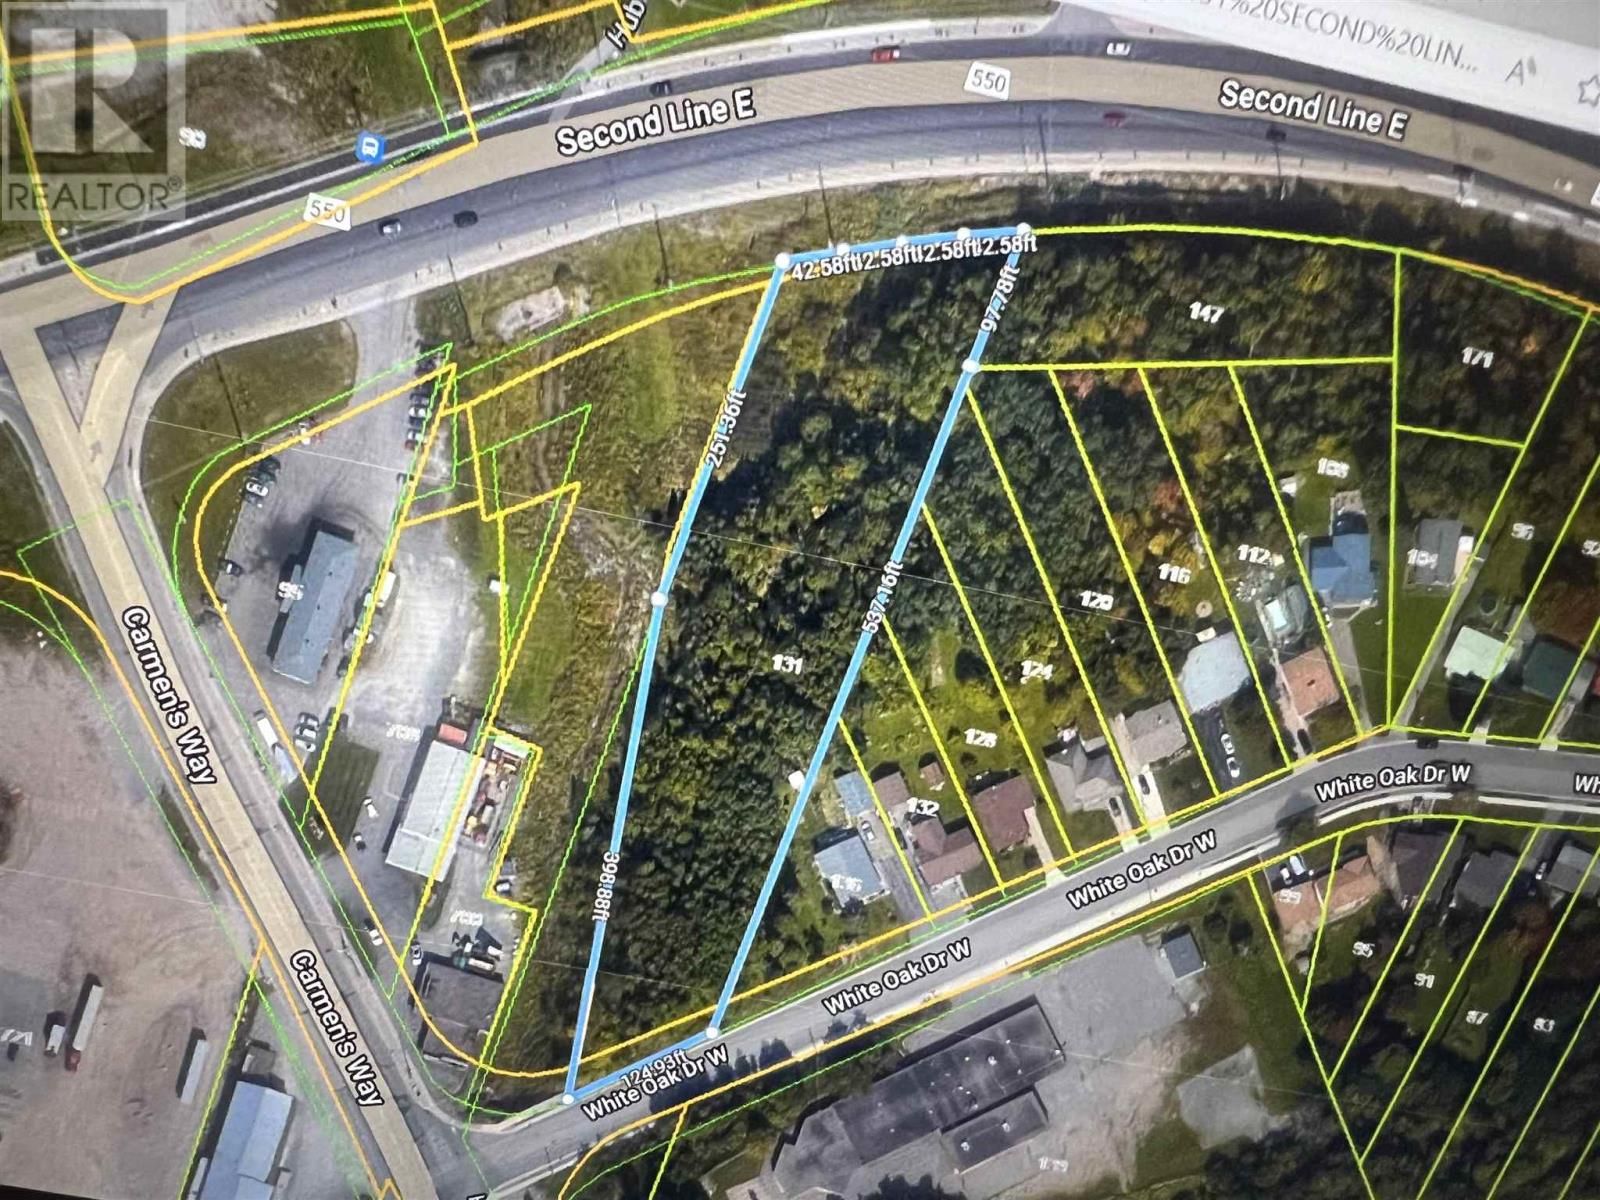 Main Photo: 131 Second Line RD in Sault Ste. Marie: Vacant Land for sale : MLS®# SM232556